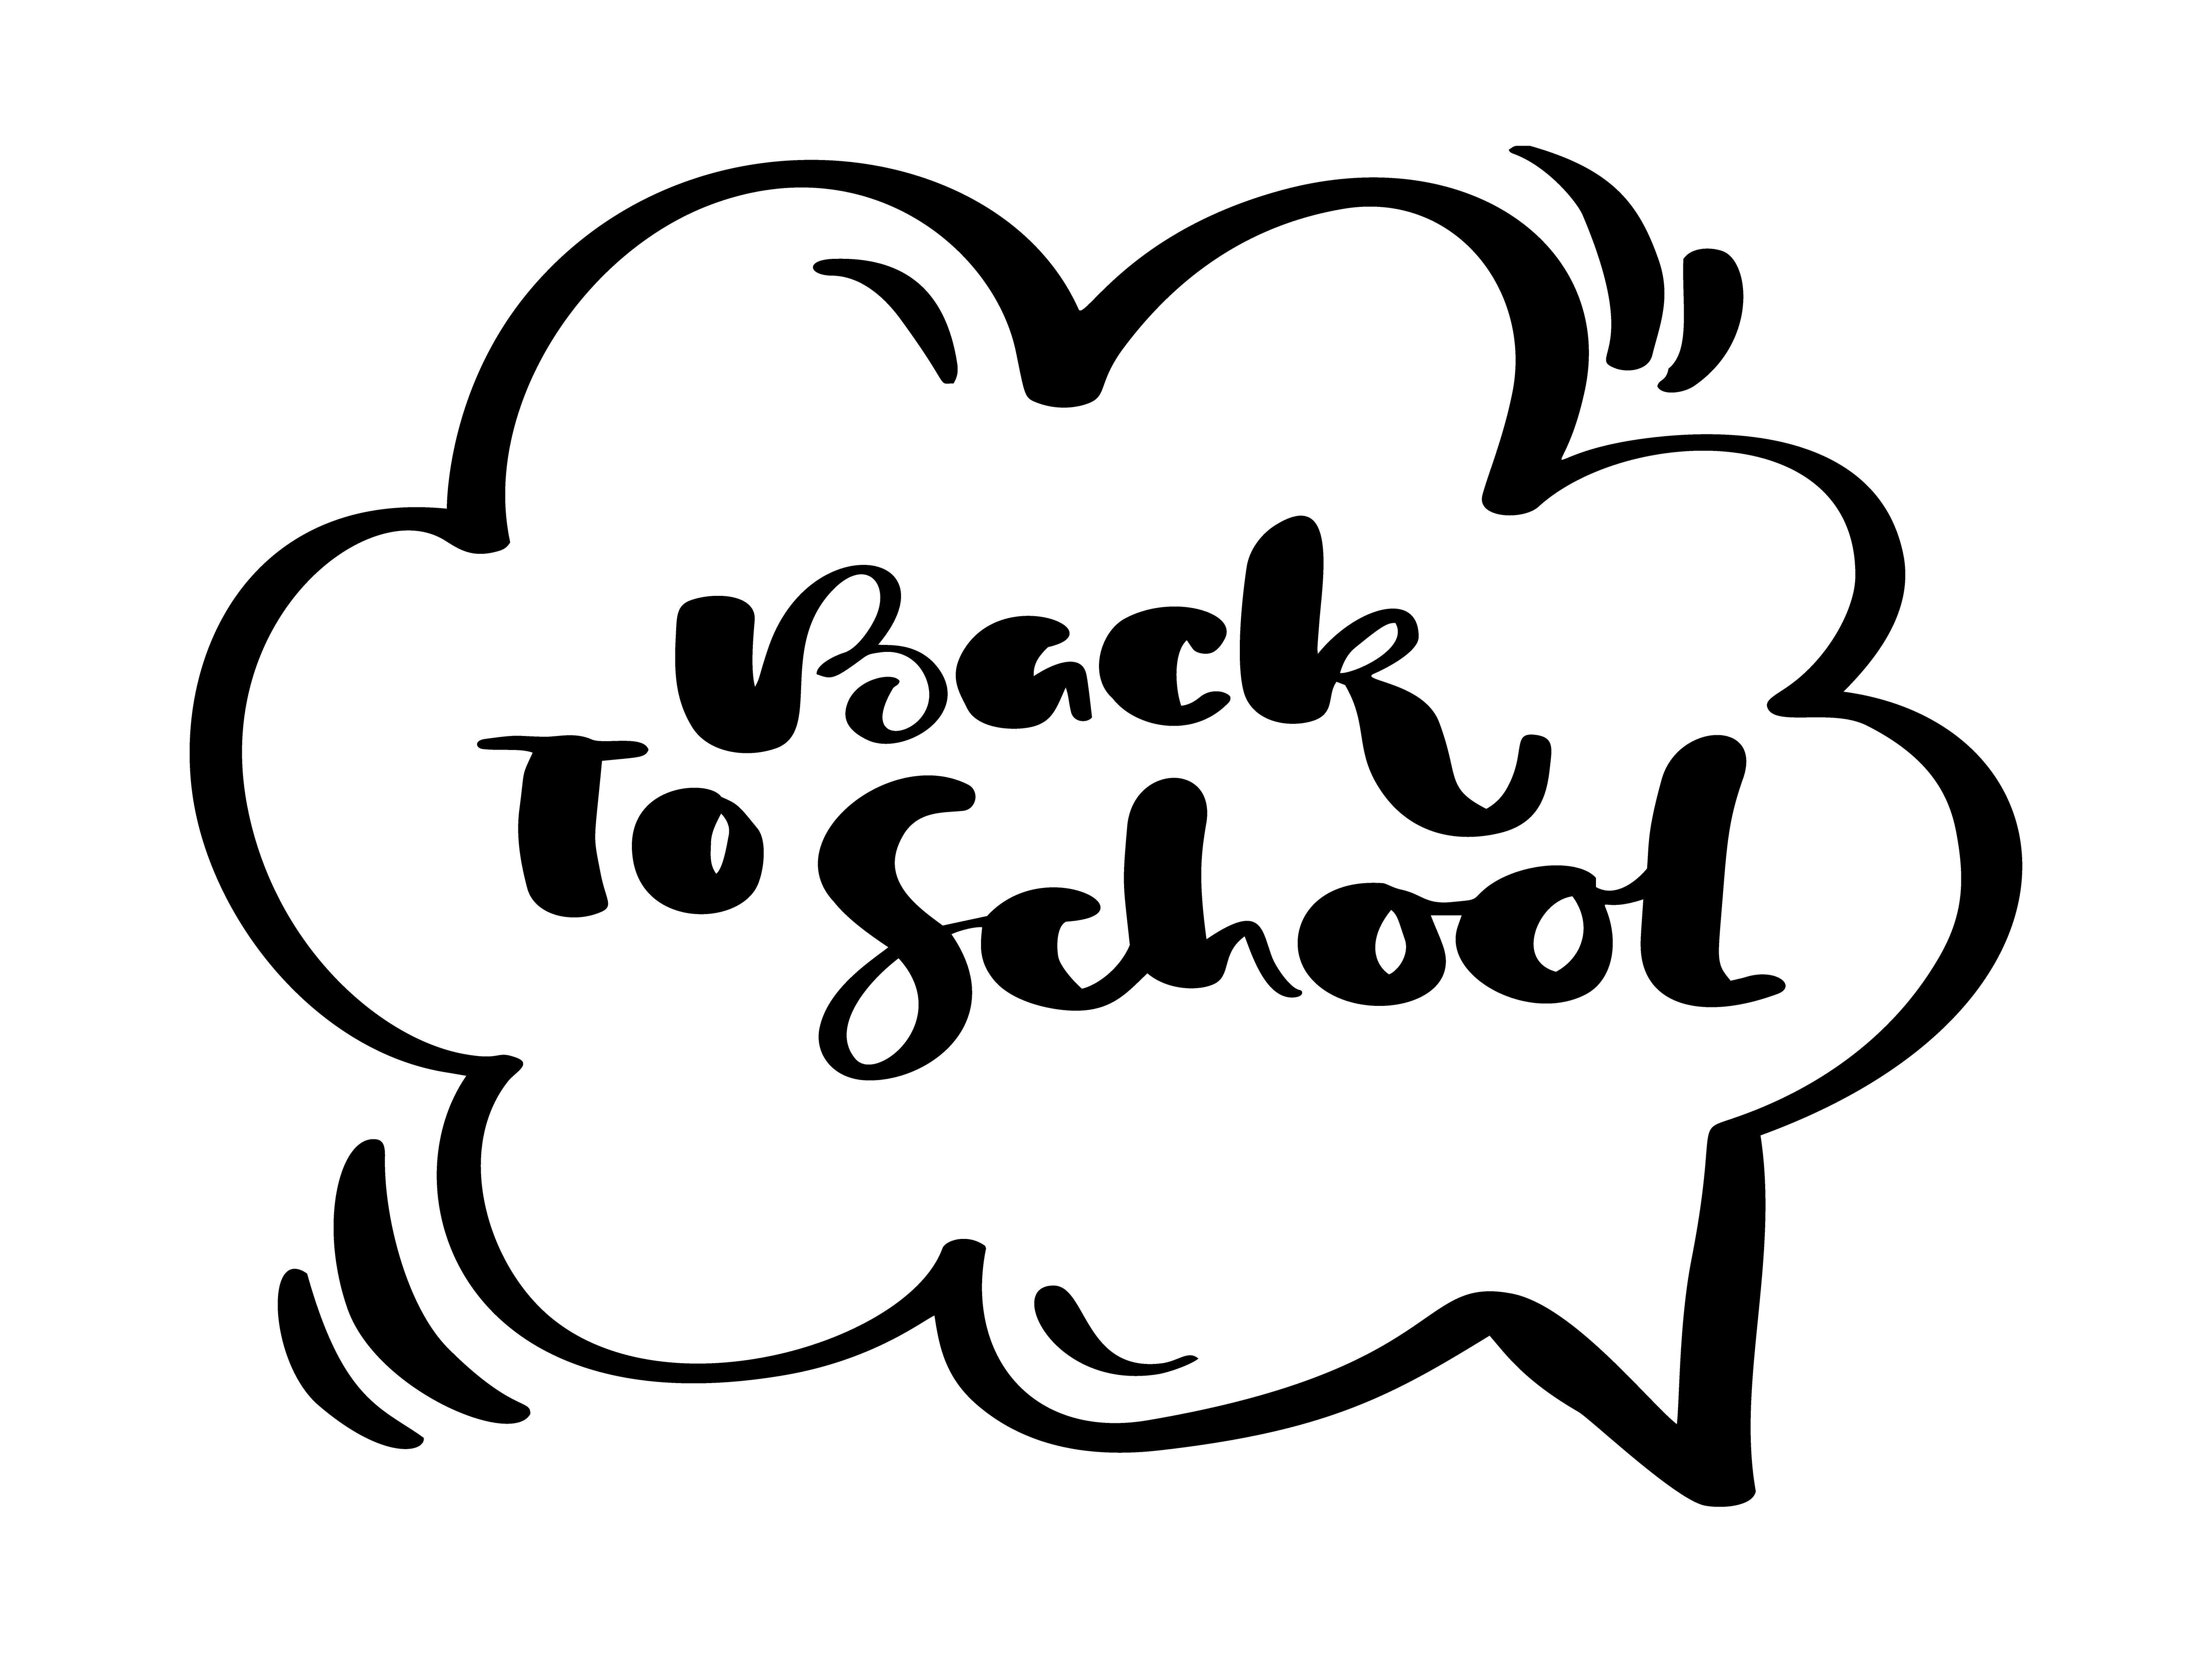 Back to school - lettering calligraphy phrase Vector Image